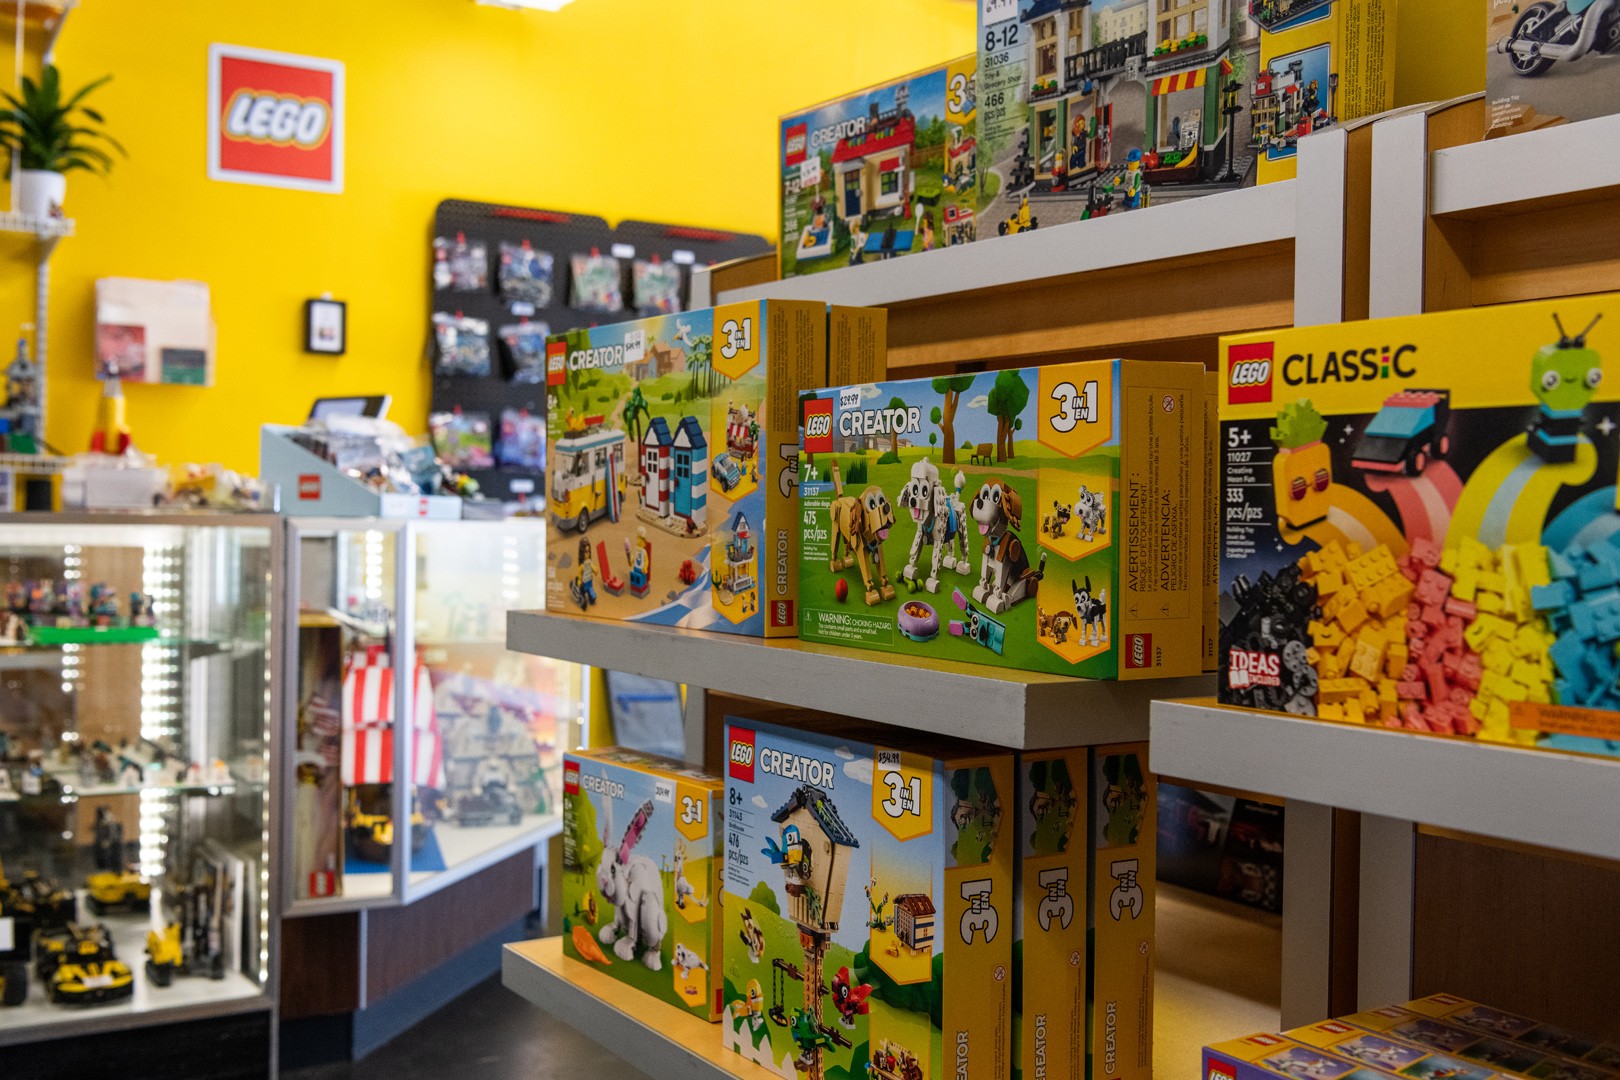 There's a shop called PHOTOBRICK that will design a Lego pic of